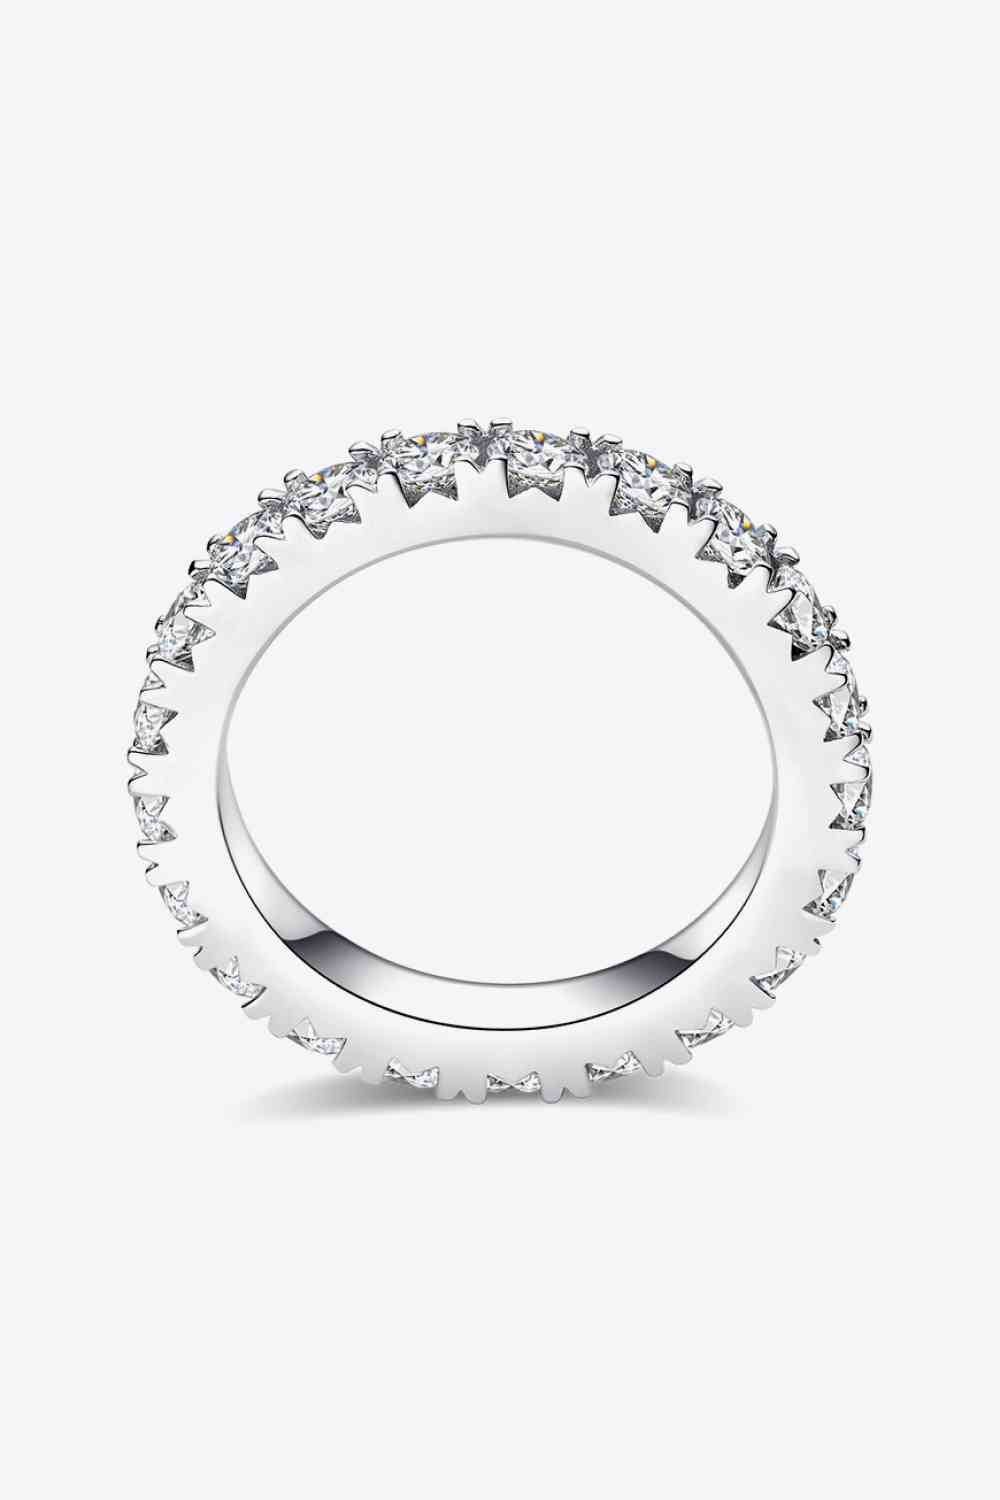 PREORDER- Adored 2.3 Carat Moissanite 925 Sterling Silver Eternity Ring